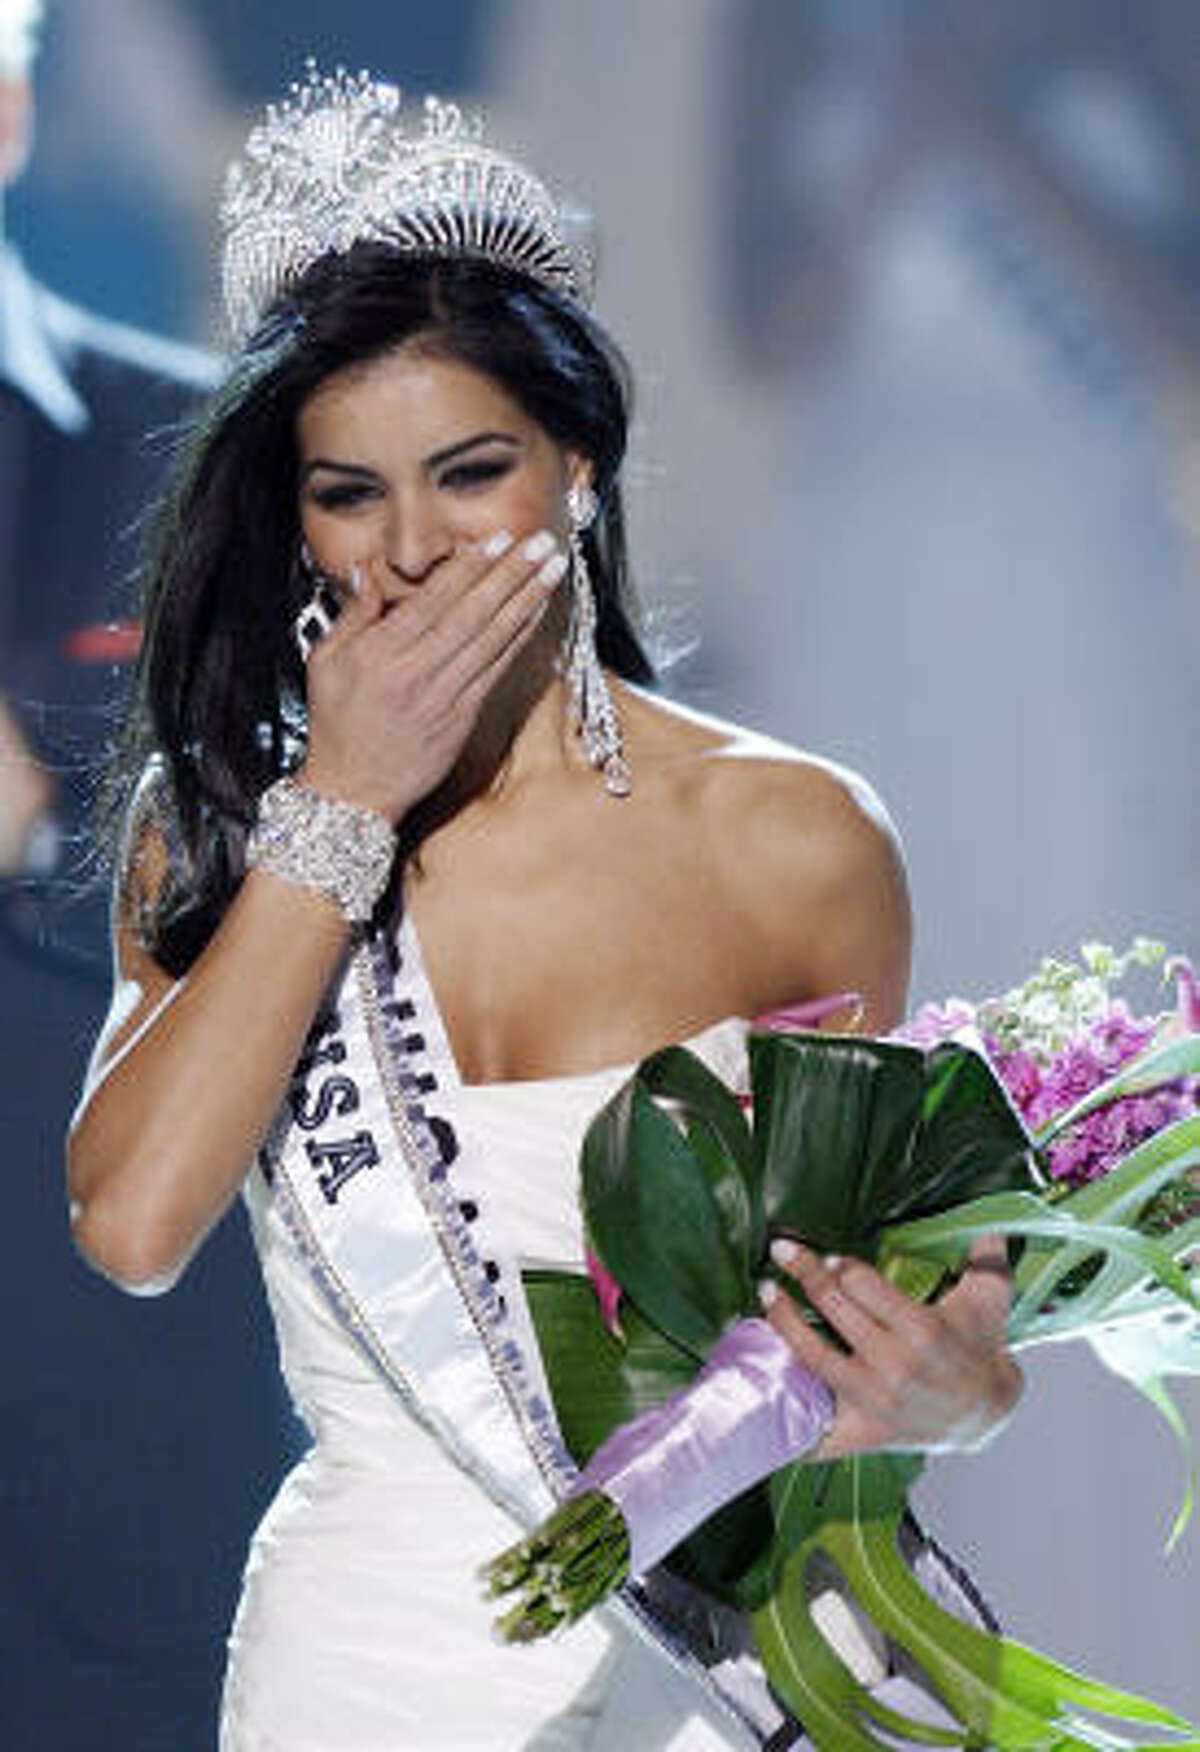 Miss USA Rima Fakih has taken heat for competing in beauty pageants and wearing revealing clothes.